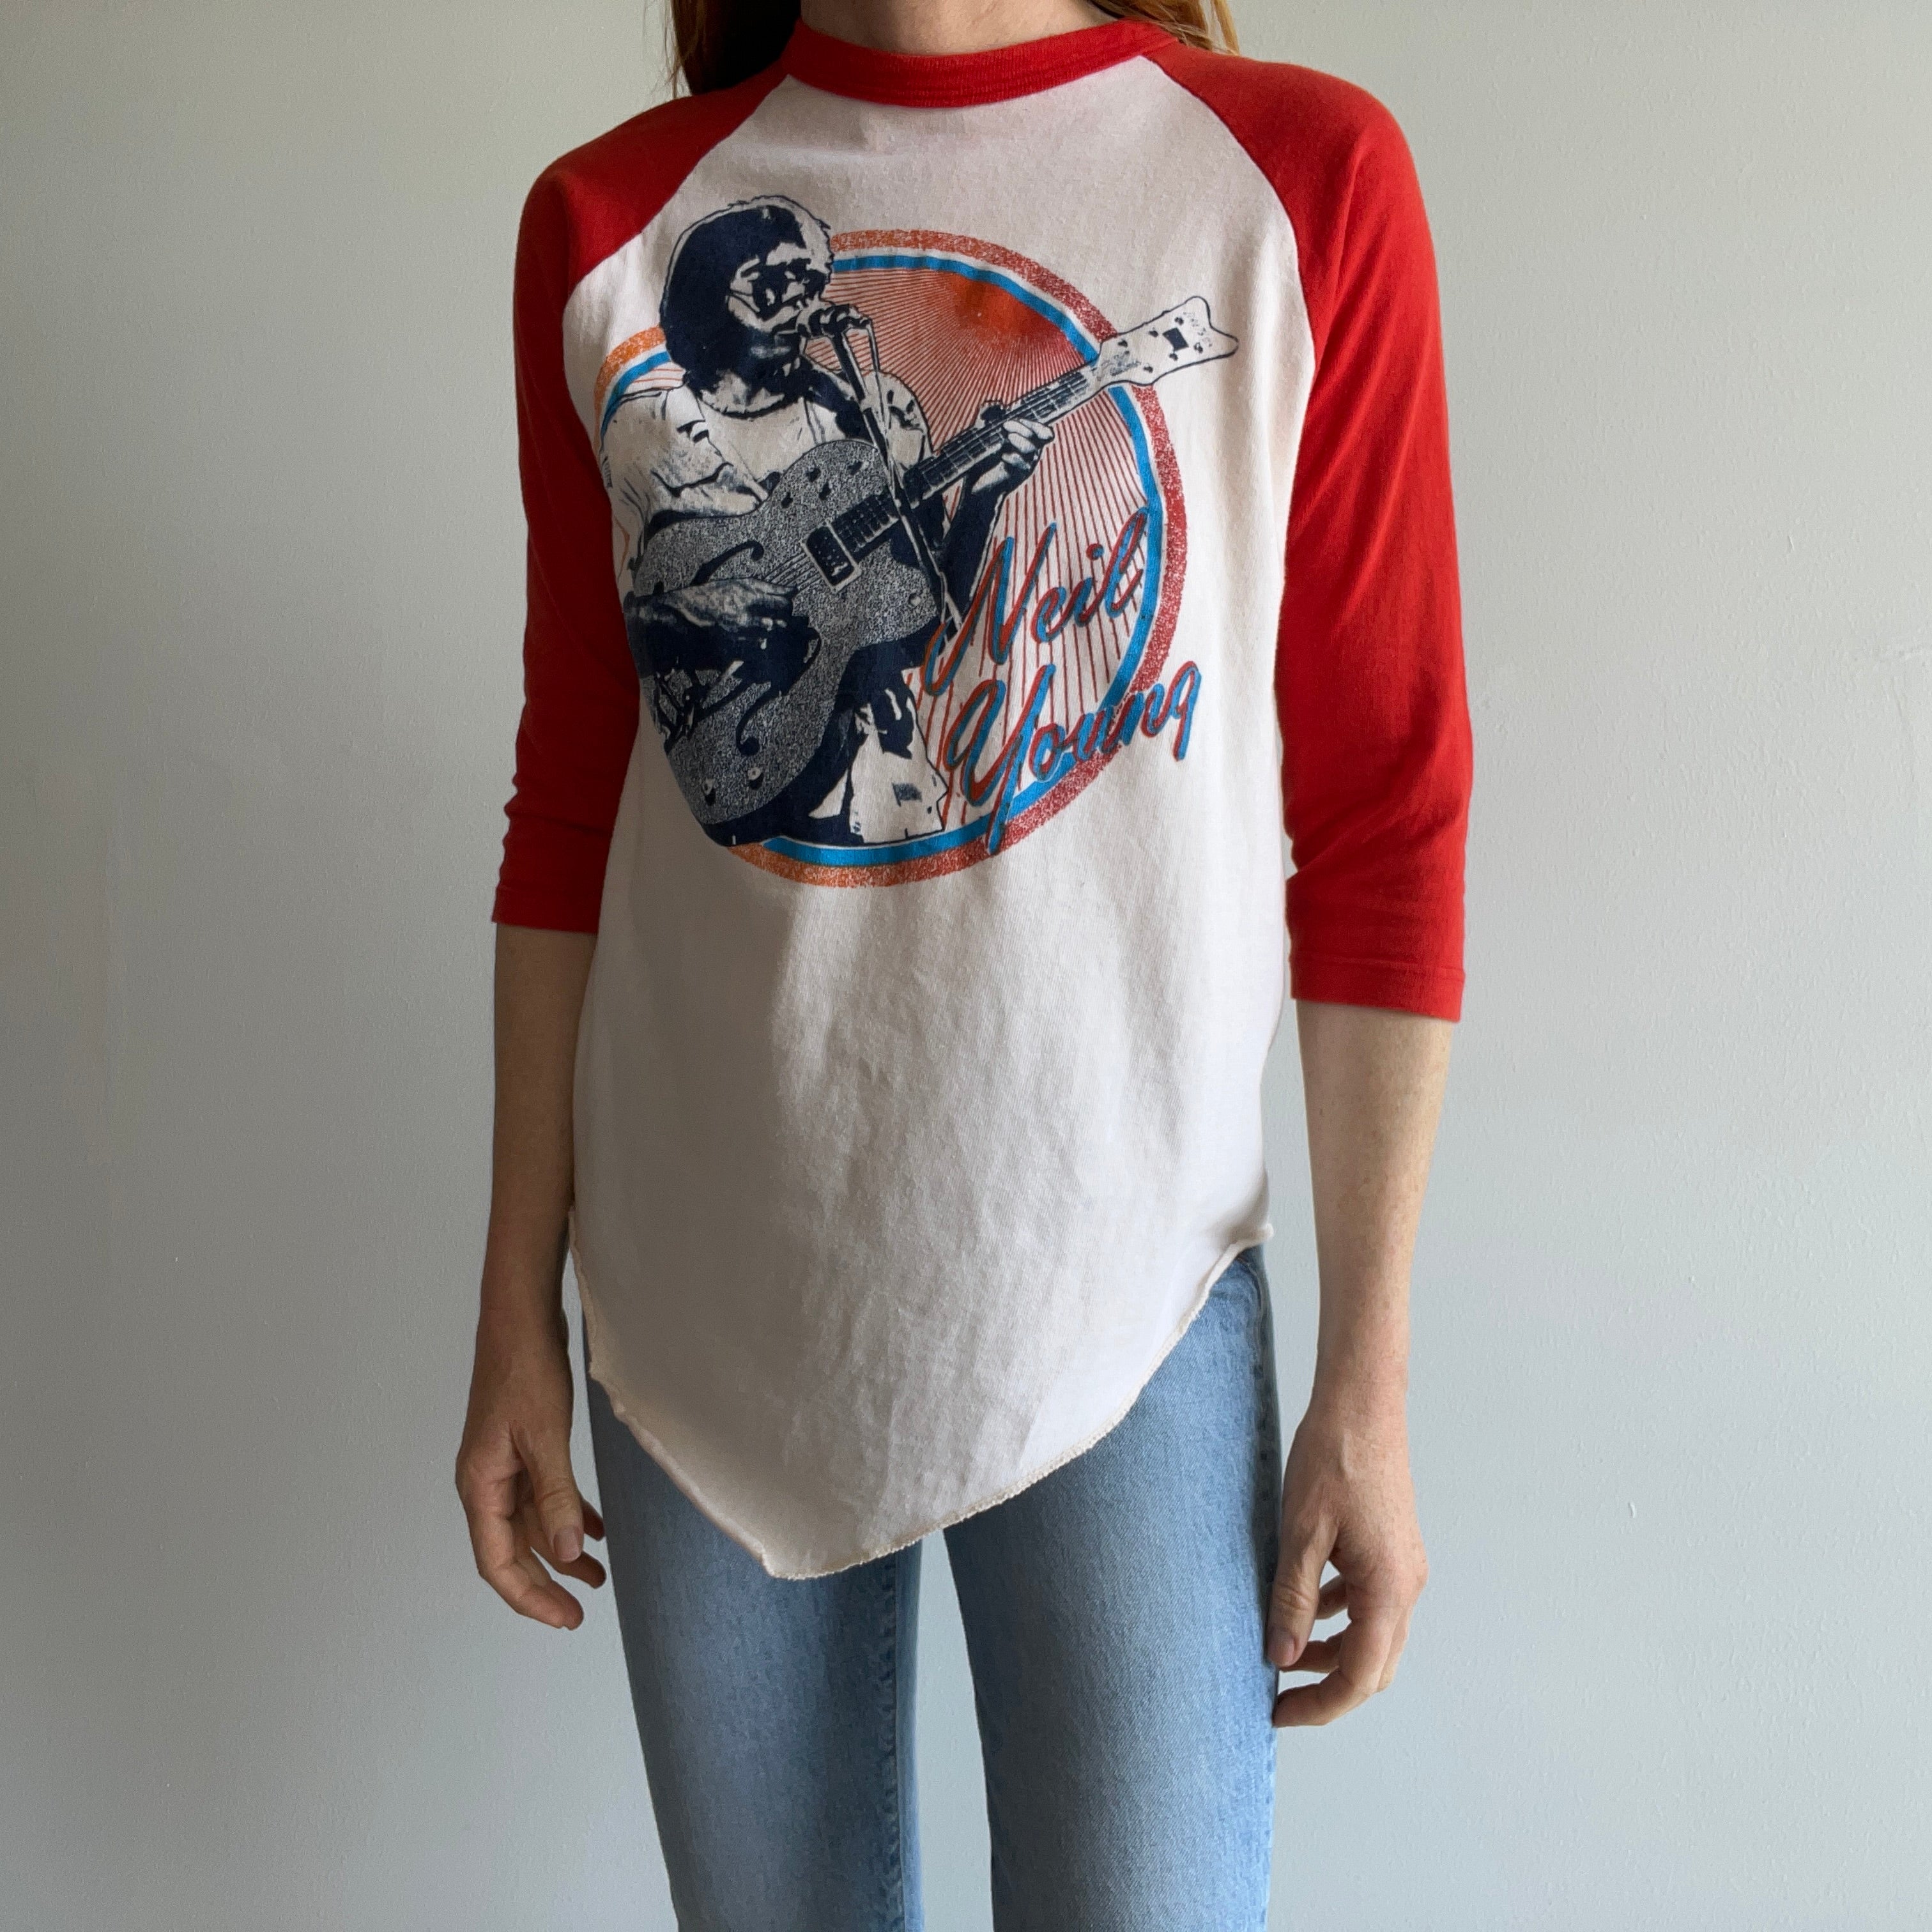 1978 Neil Young Crazy Horse Tour Cotton Baseball T-Shirt - For Collector/Super Fan Only